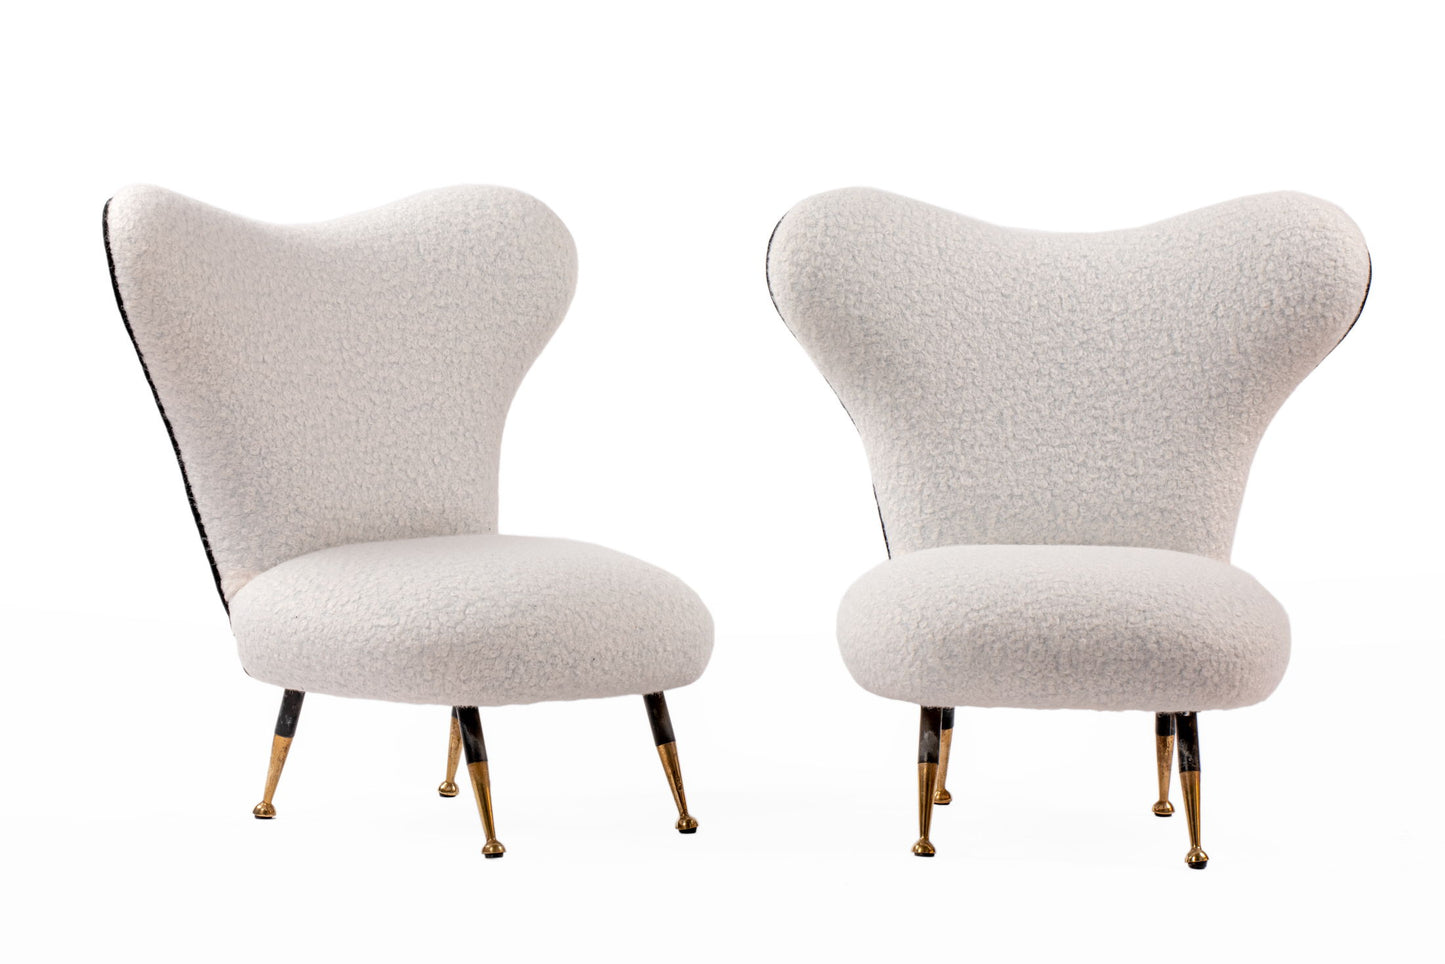 Pair of white bouclé bedroom armchairs from the 60s